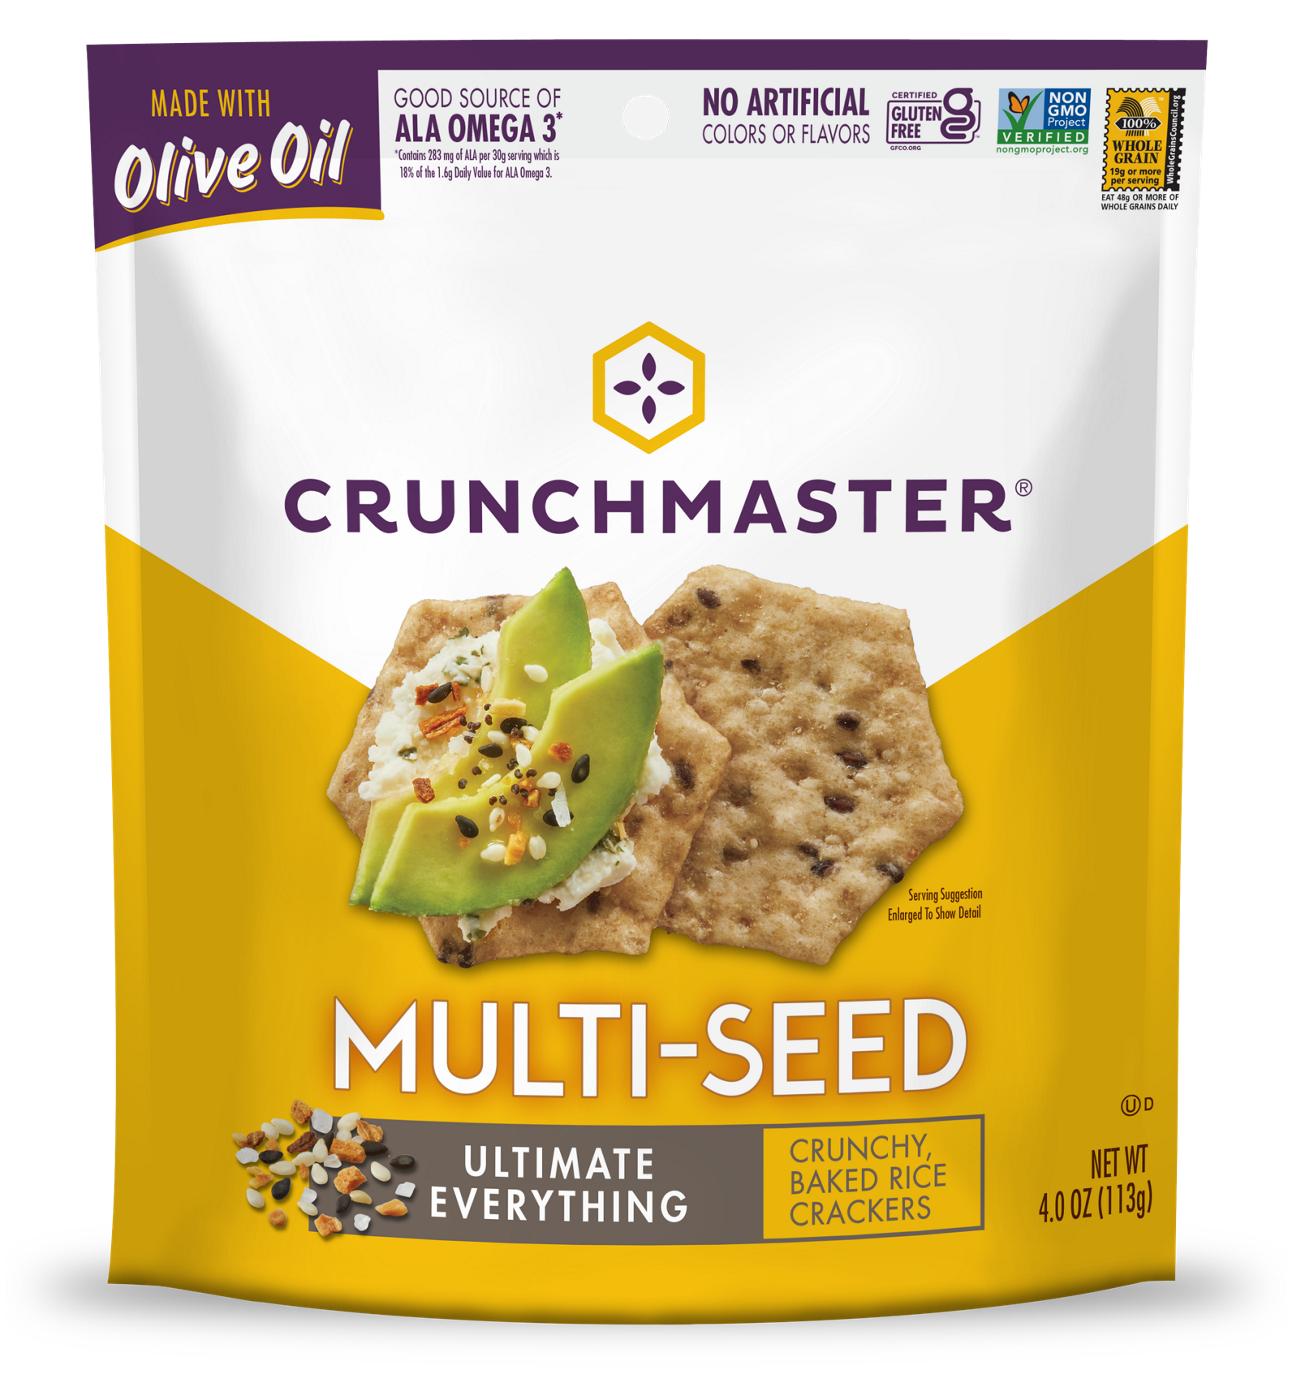 Crunchmaster Multi-Seed Ultimate Everything Baked Rice Crackers; image 1 of 2